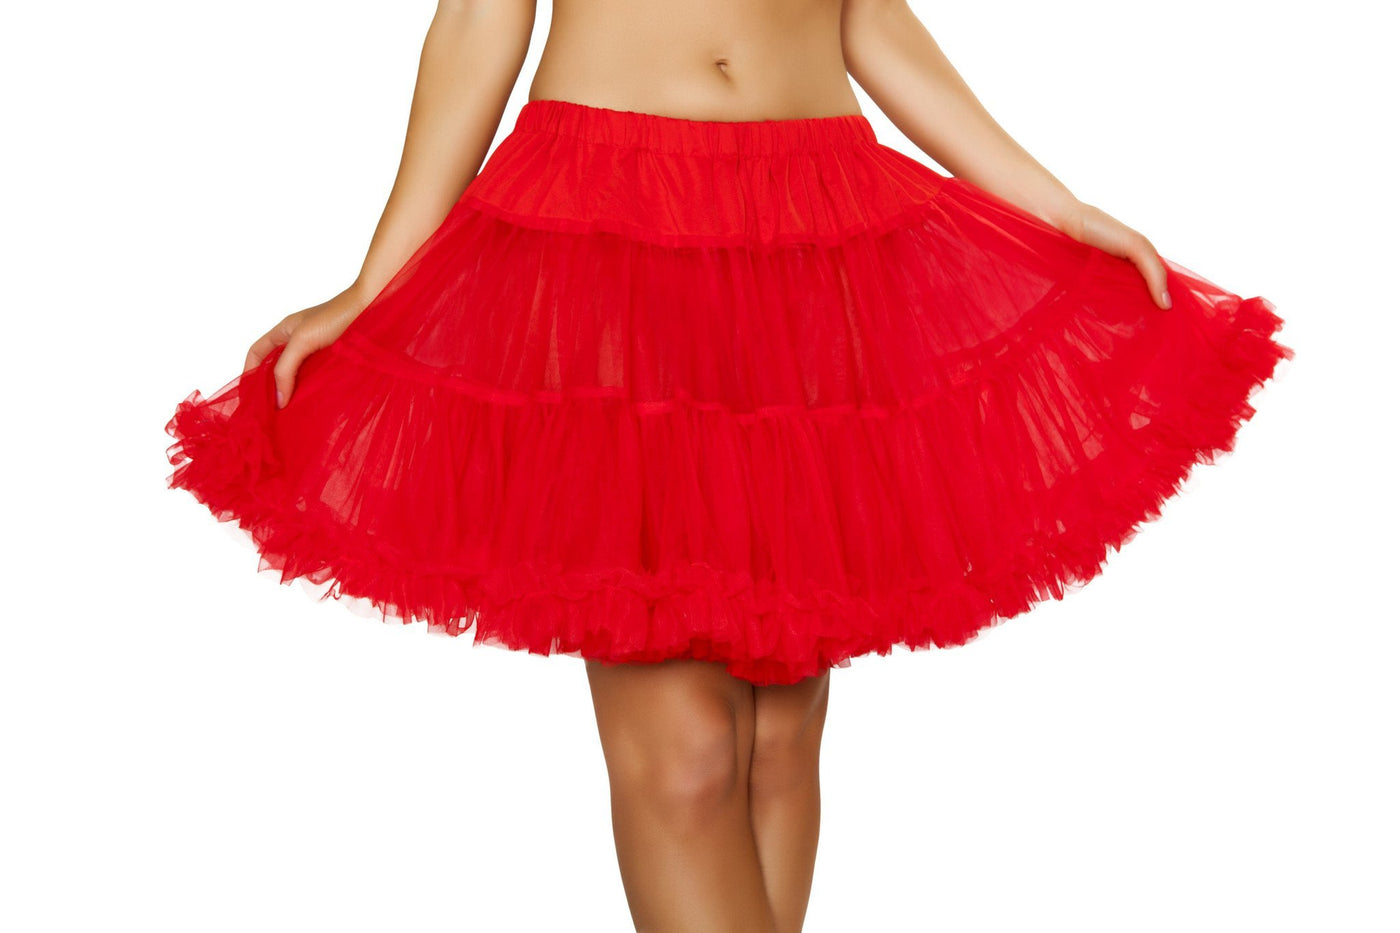 Buy Fluffy Petticoat from RomaRetailShop for 18.99 with Same Day Shipping Designed by Roma Costume 1400-Red-O/S